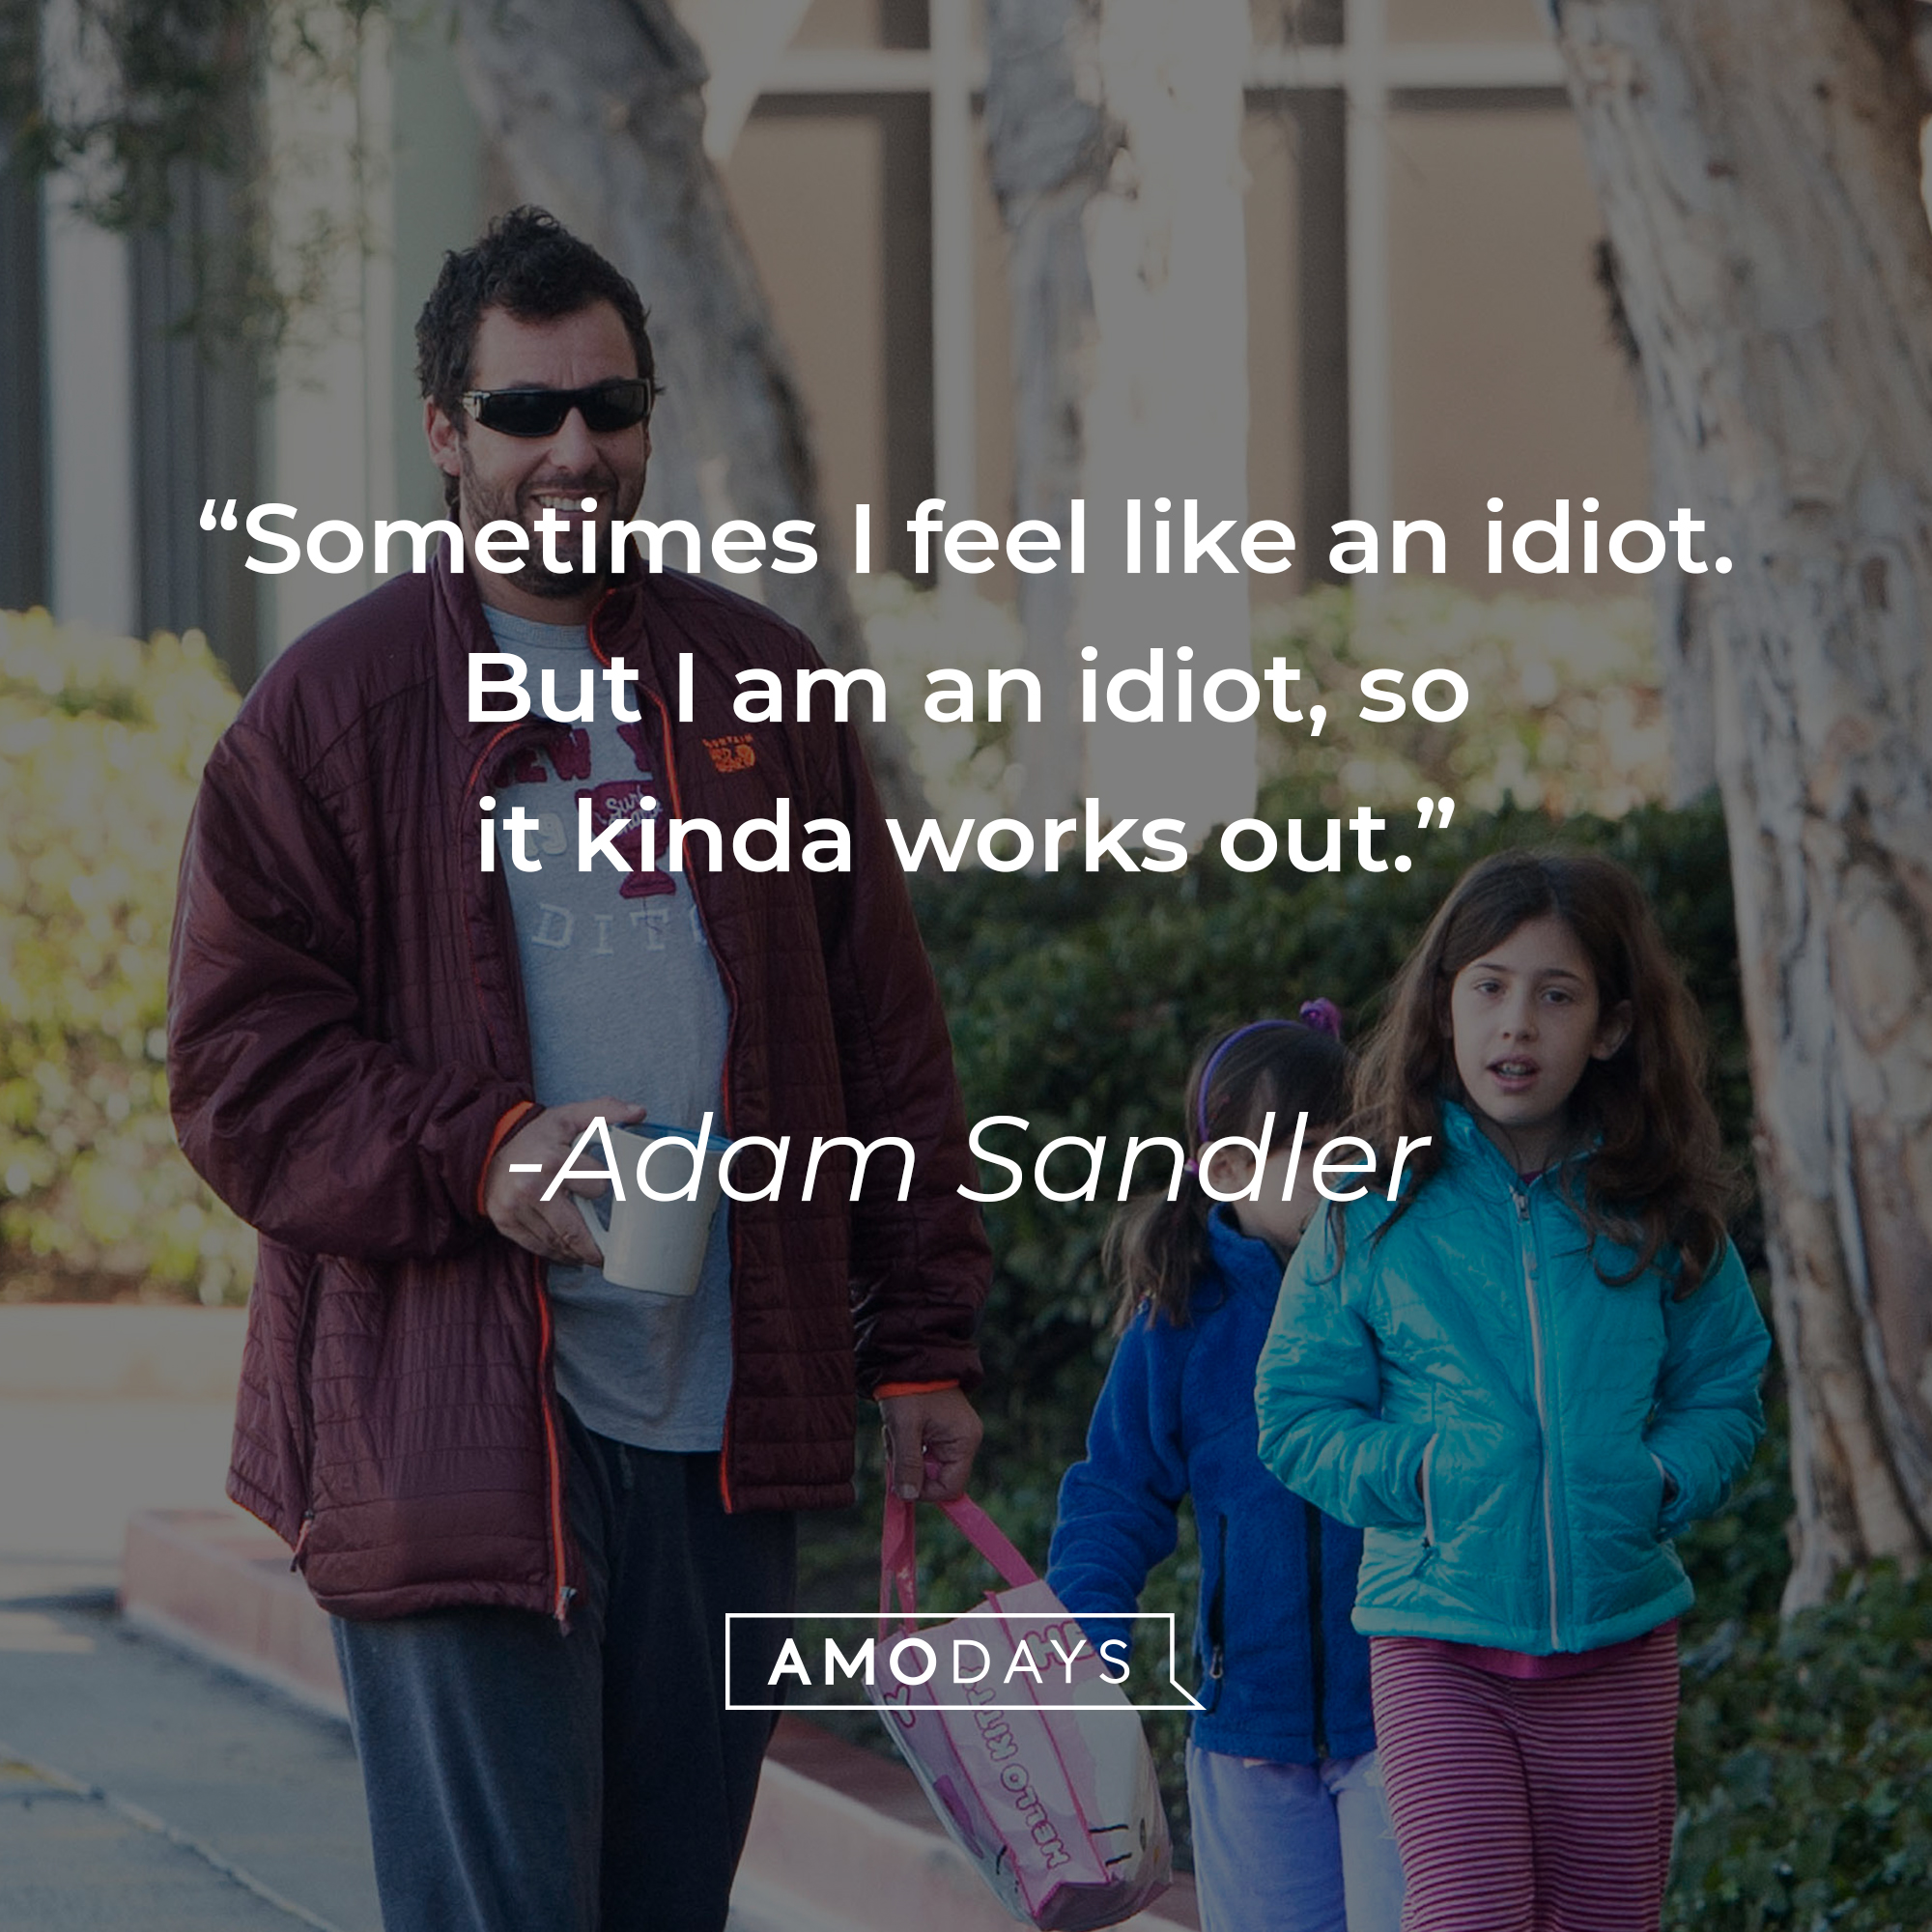 Adam Sandler's quote: "Sometimes I feel like an idiot. But I am an idiot, so it kinda works out.” | Source: Getty Images